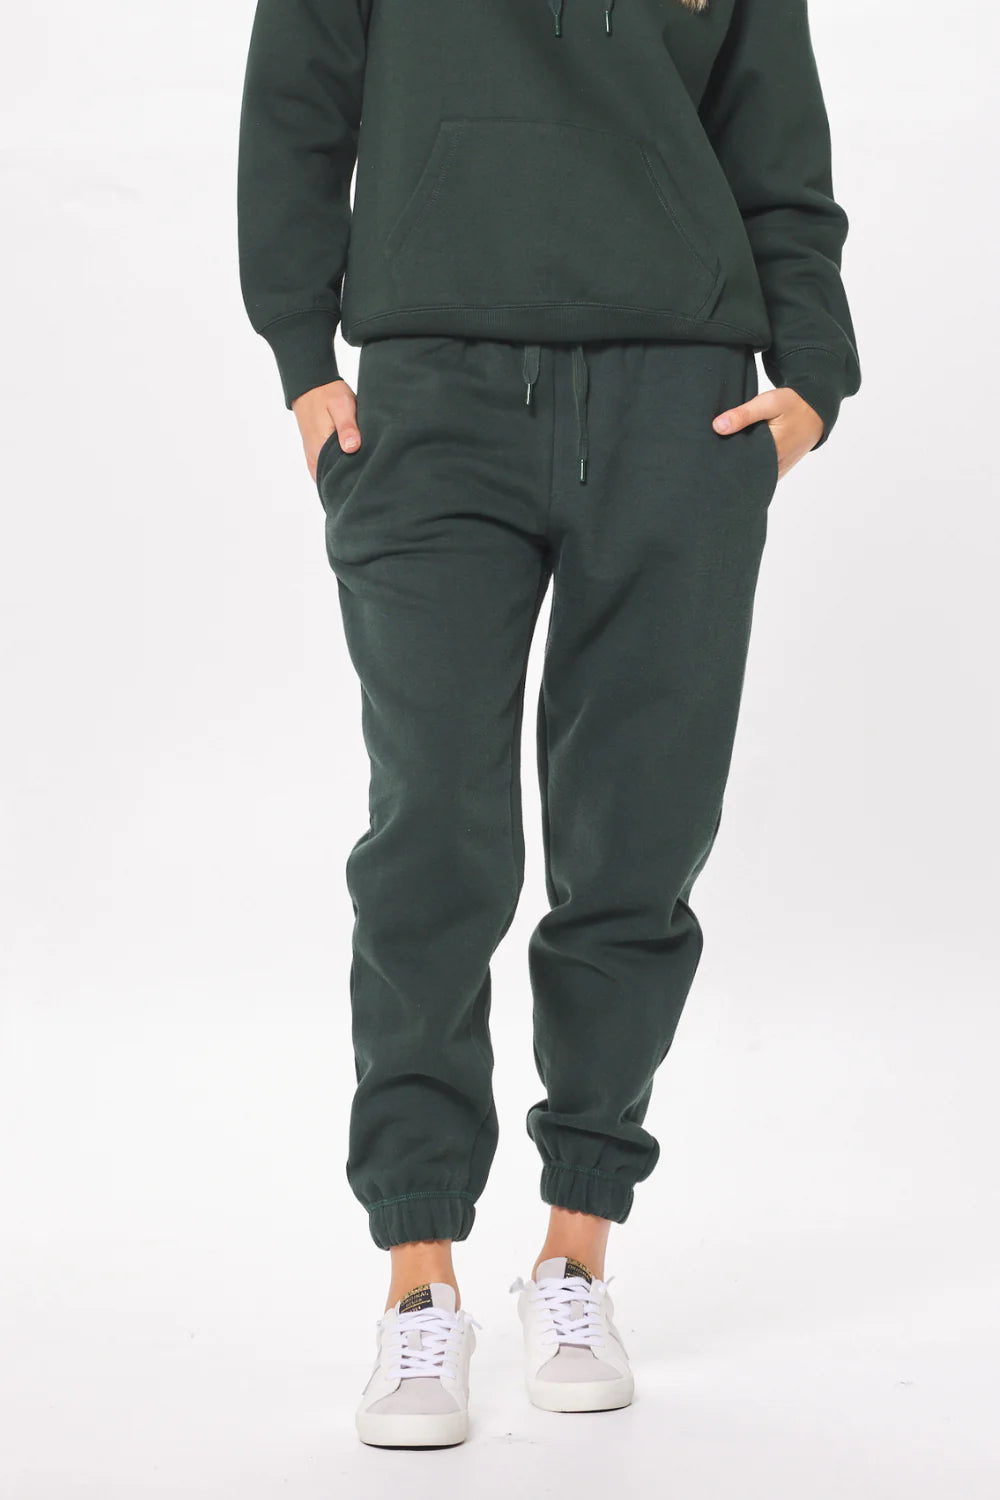 Go In Green Joggers